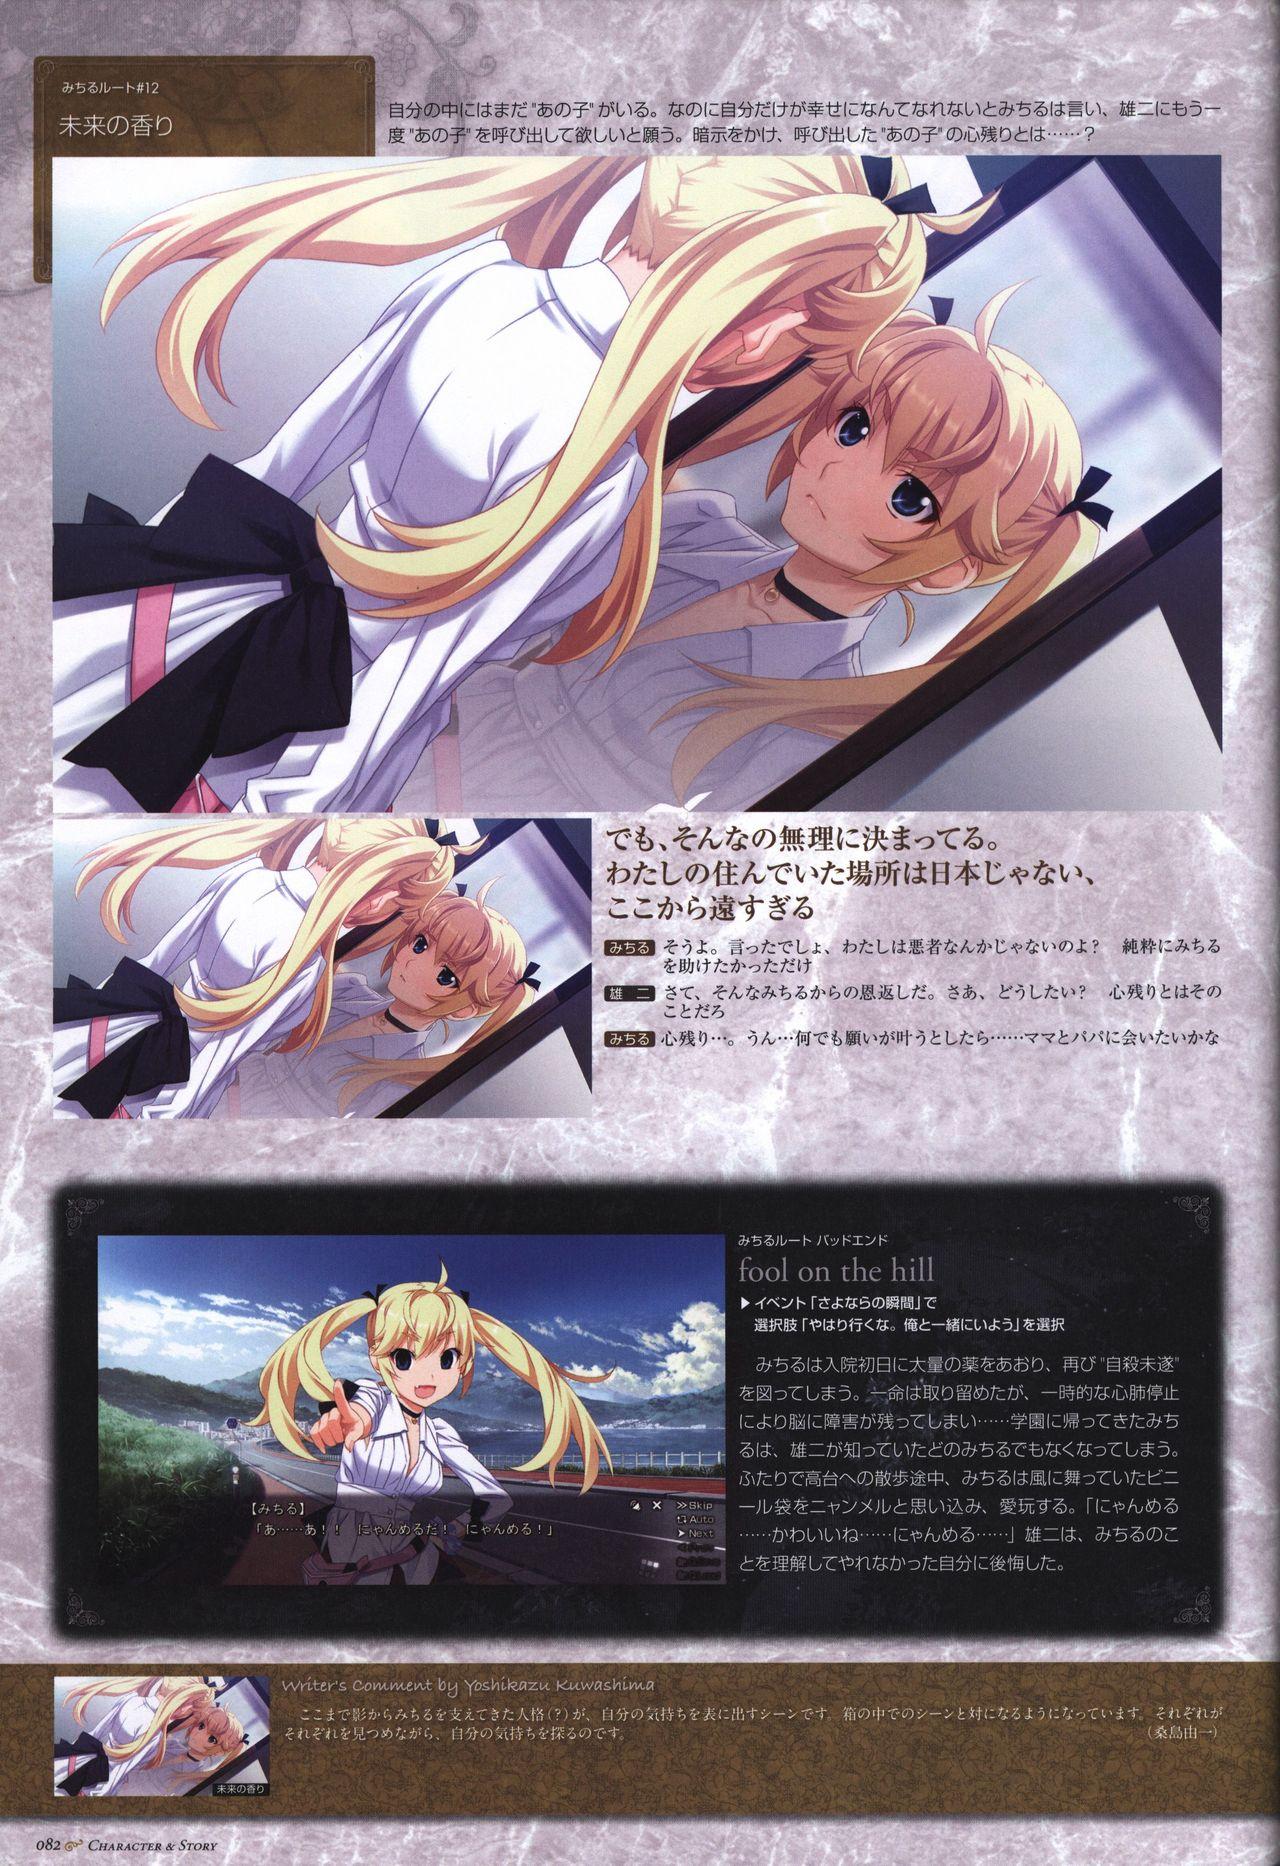 The Fruit of Grisaia Visual FanBook 82